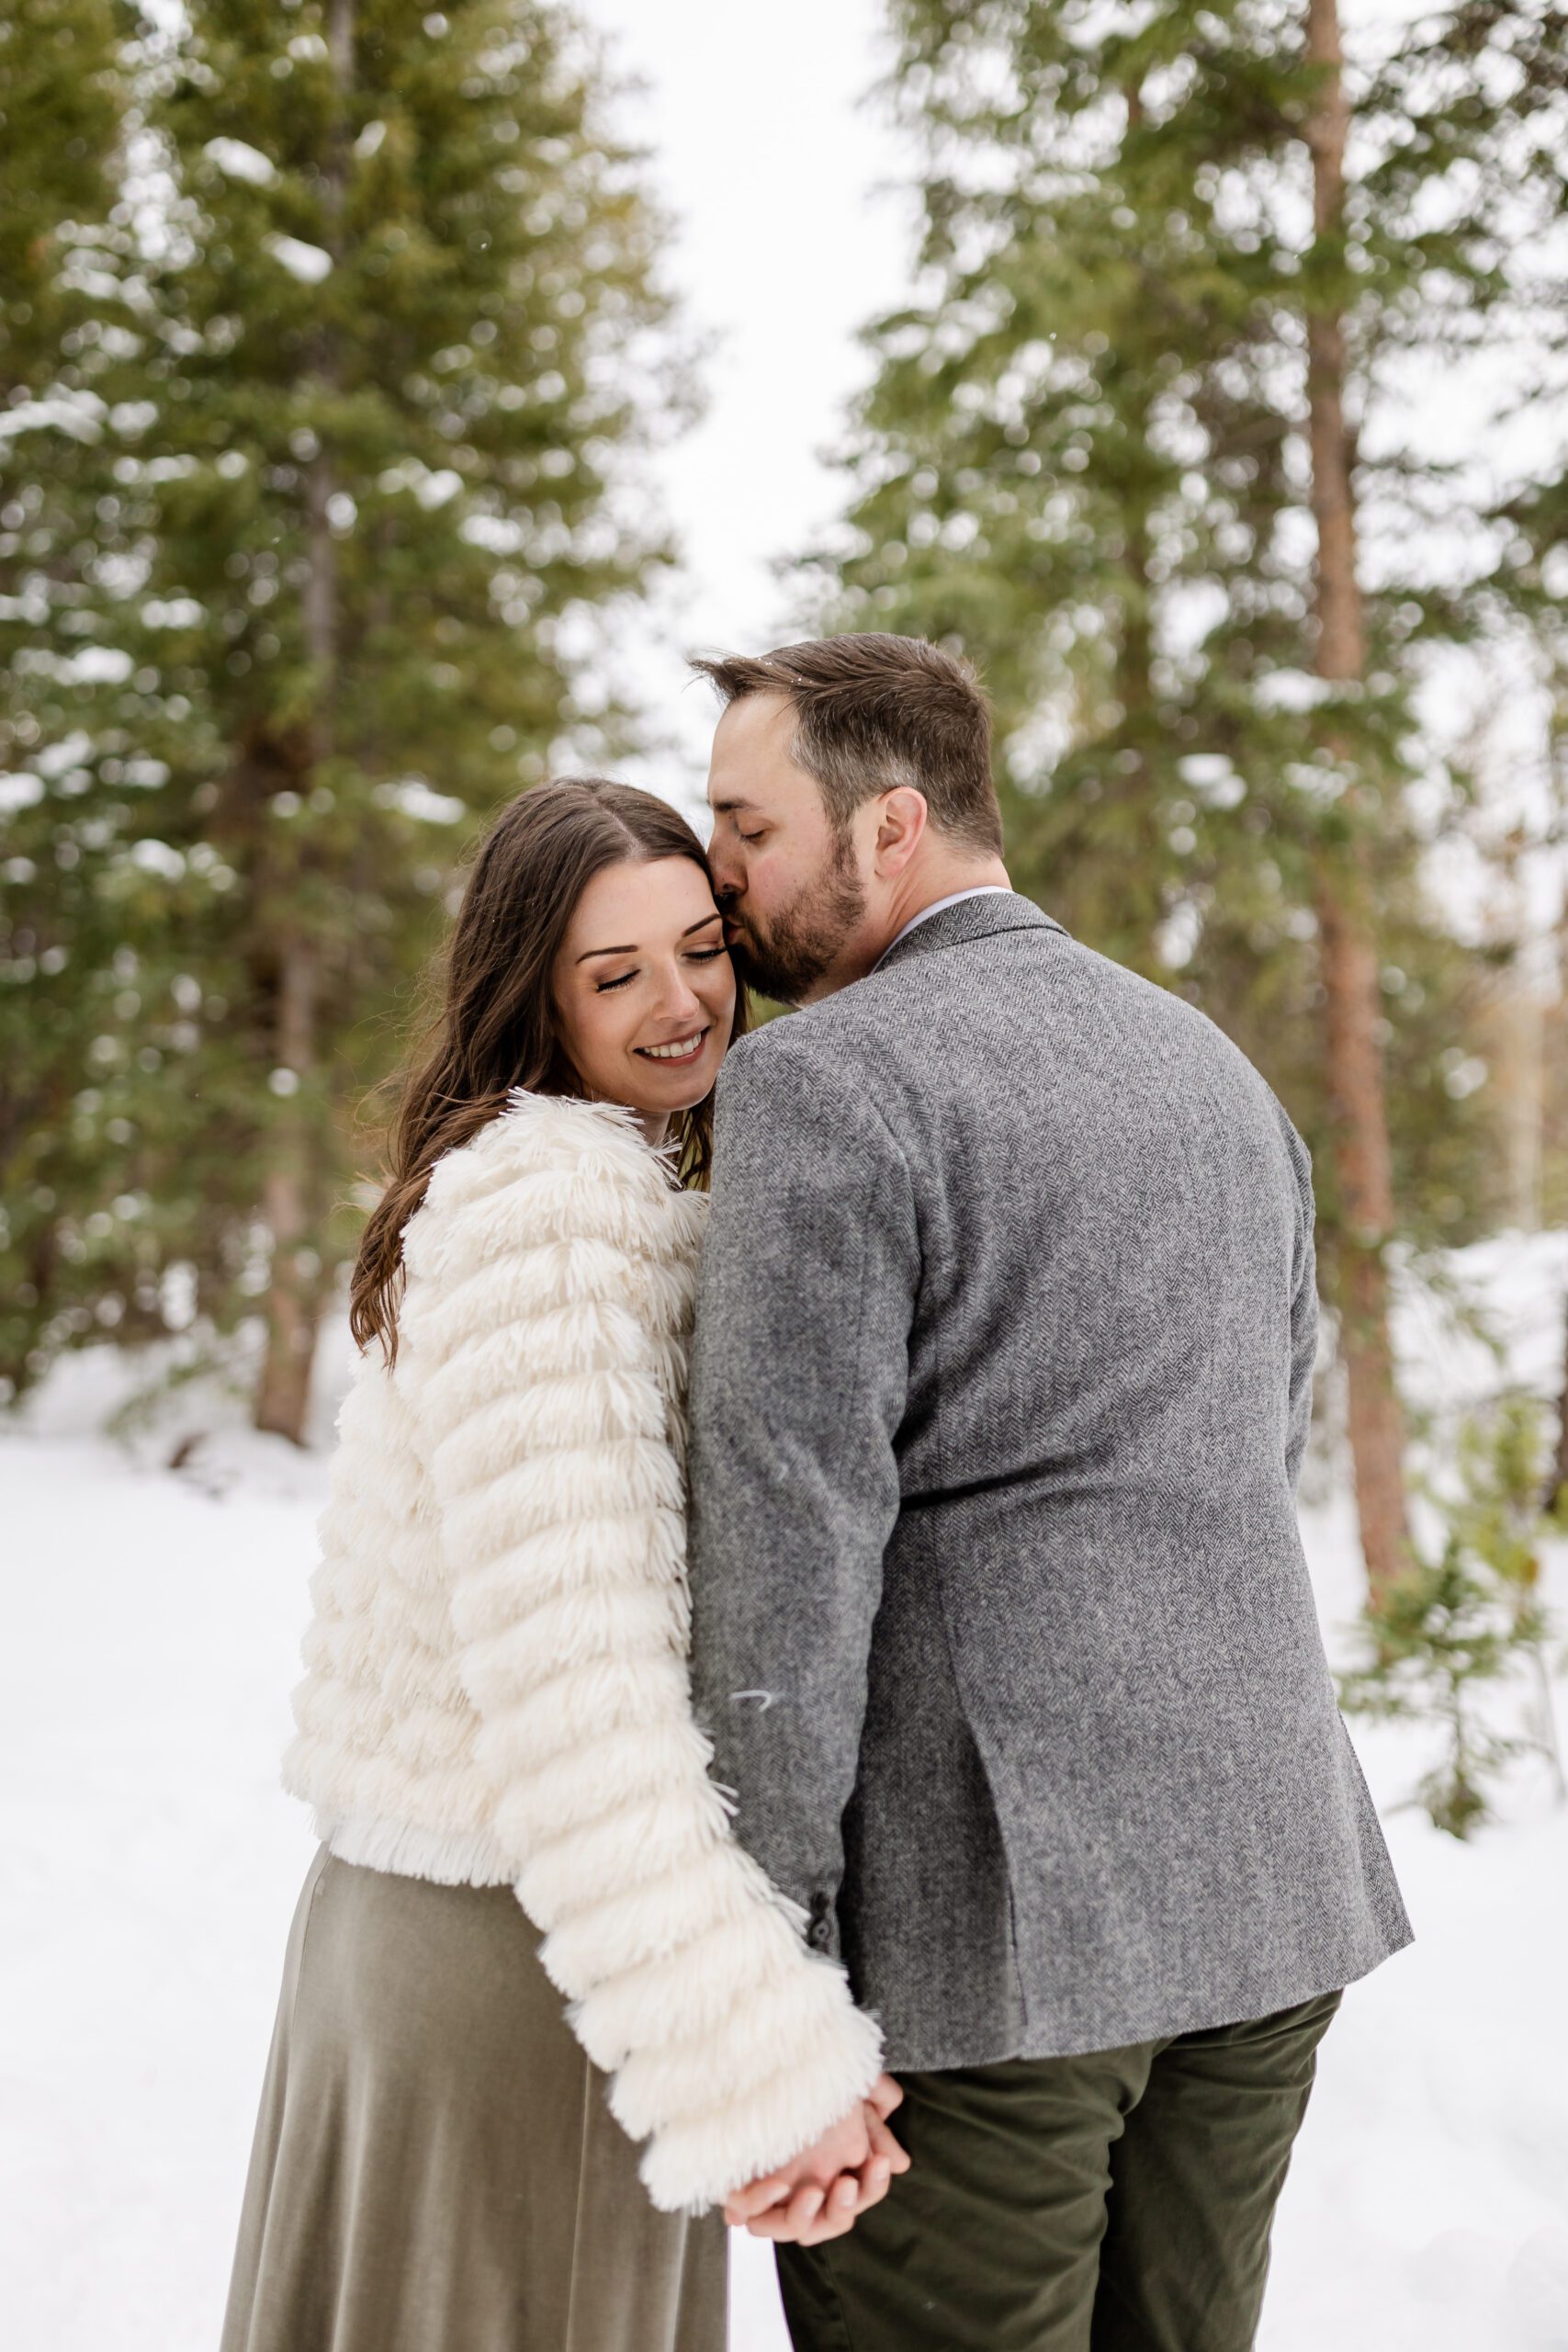 bride smiles sweetly, wearing a white fur coat, while her groom kisses her cheek at their Winter Park elopement.